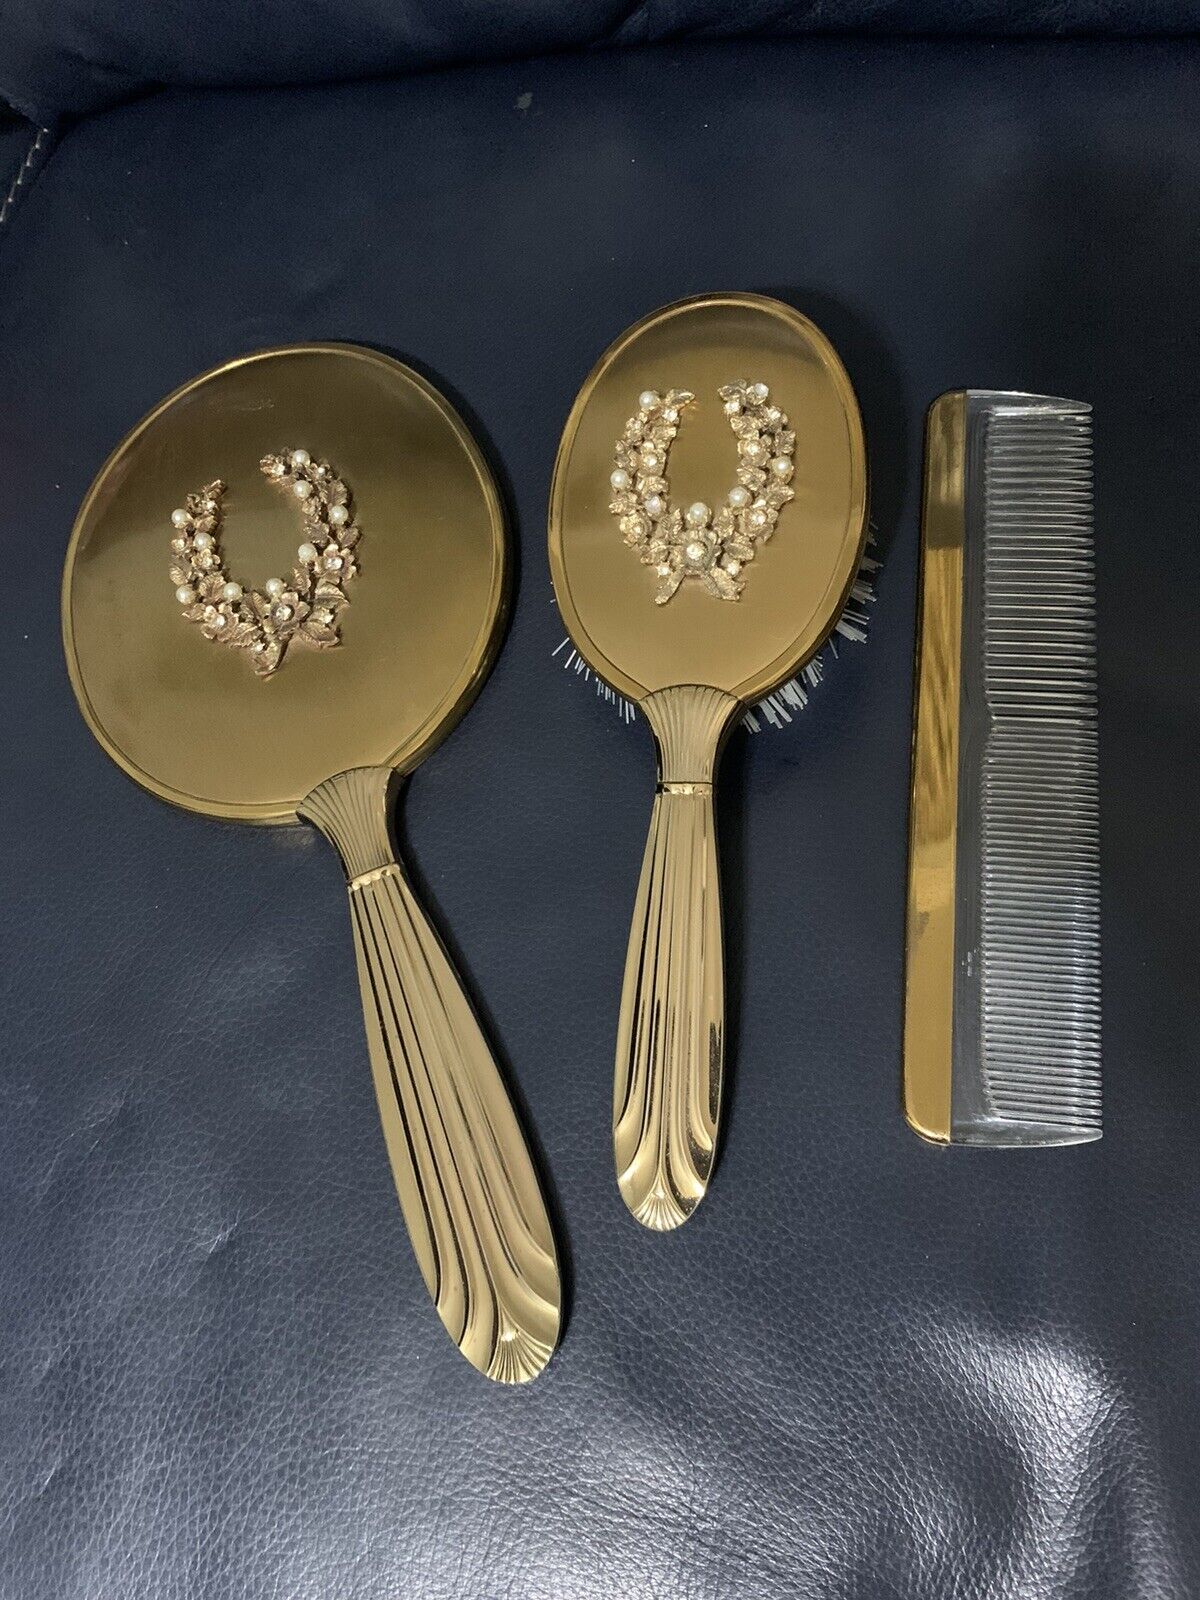 Vintage Set 3 Piece Gold Tone Brush, Mirror, Comb Floral Design With Pearls